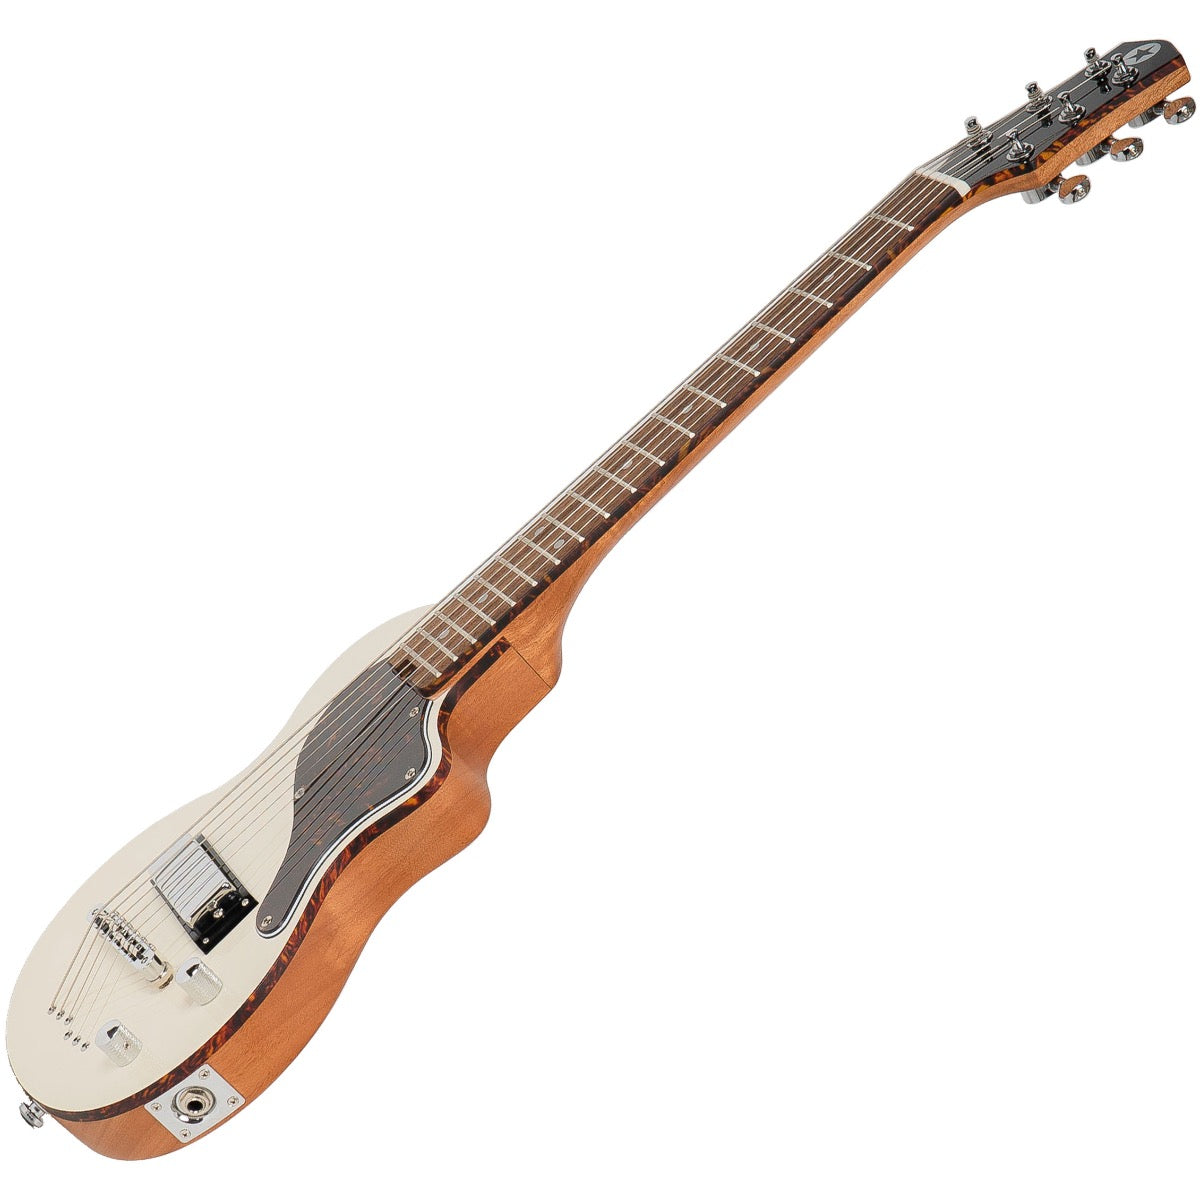 Perspective view of Blackstar Carry-On Travel Guitar - White showing top and right side